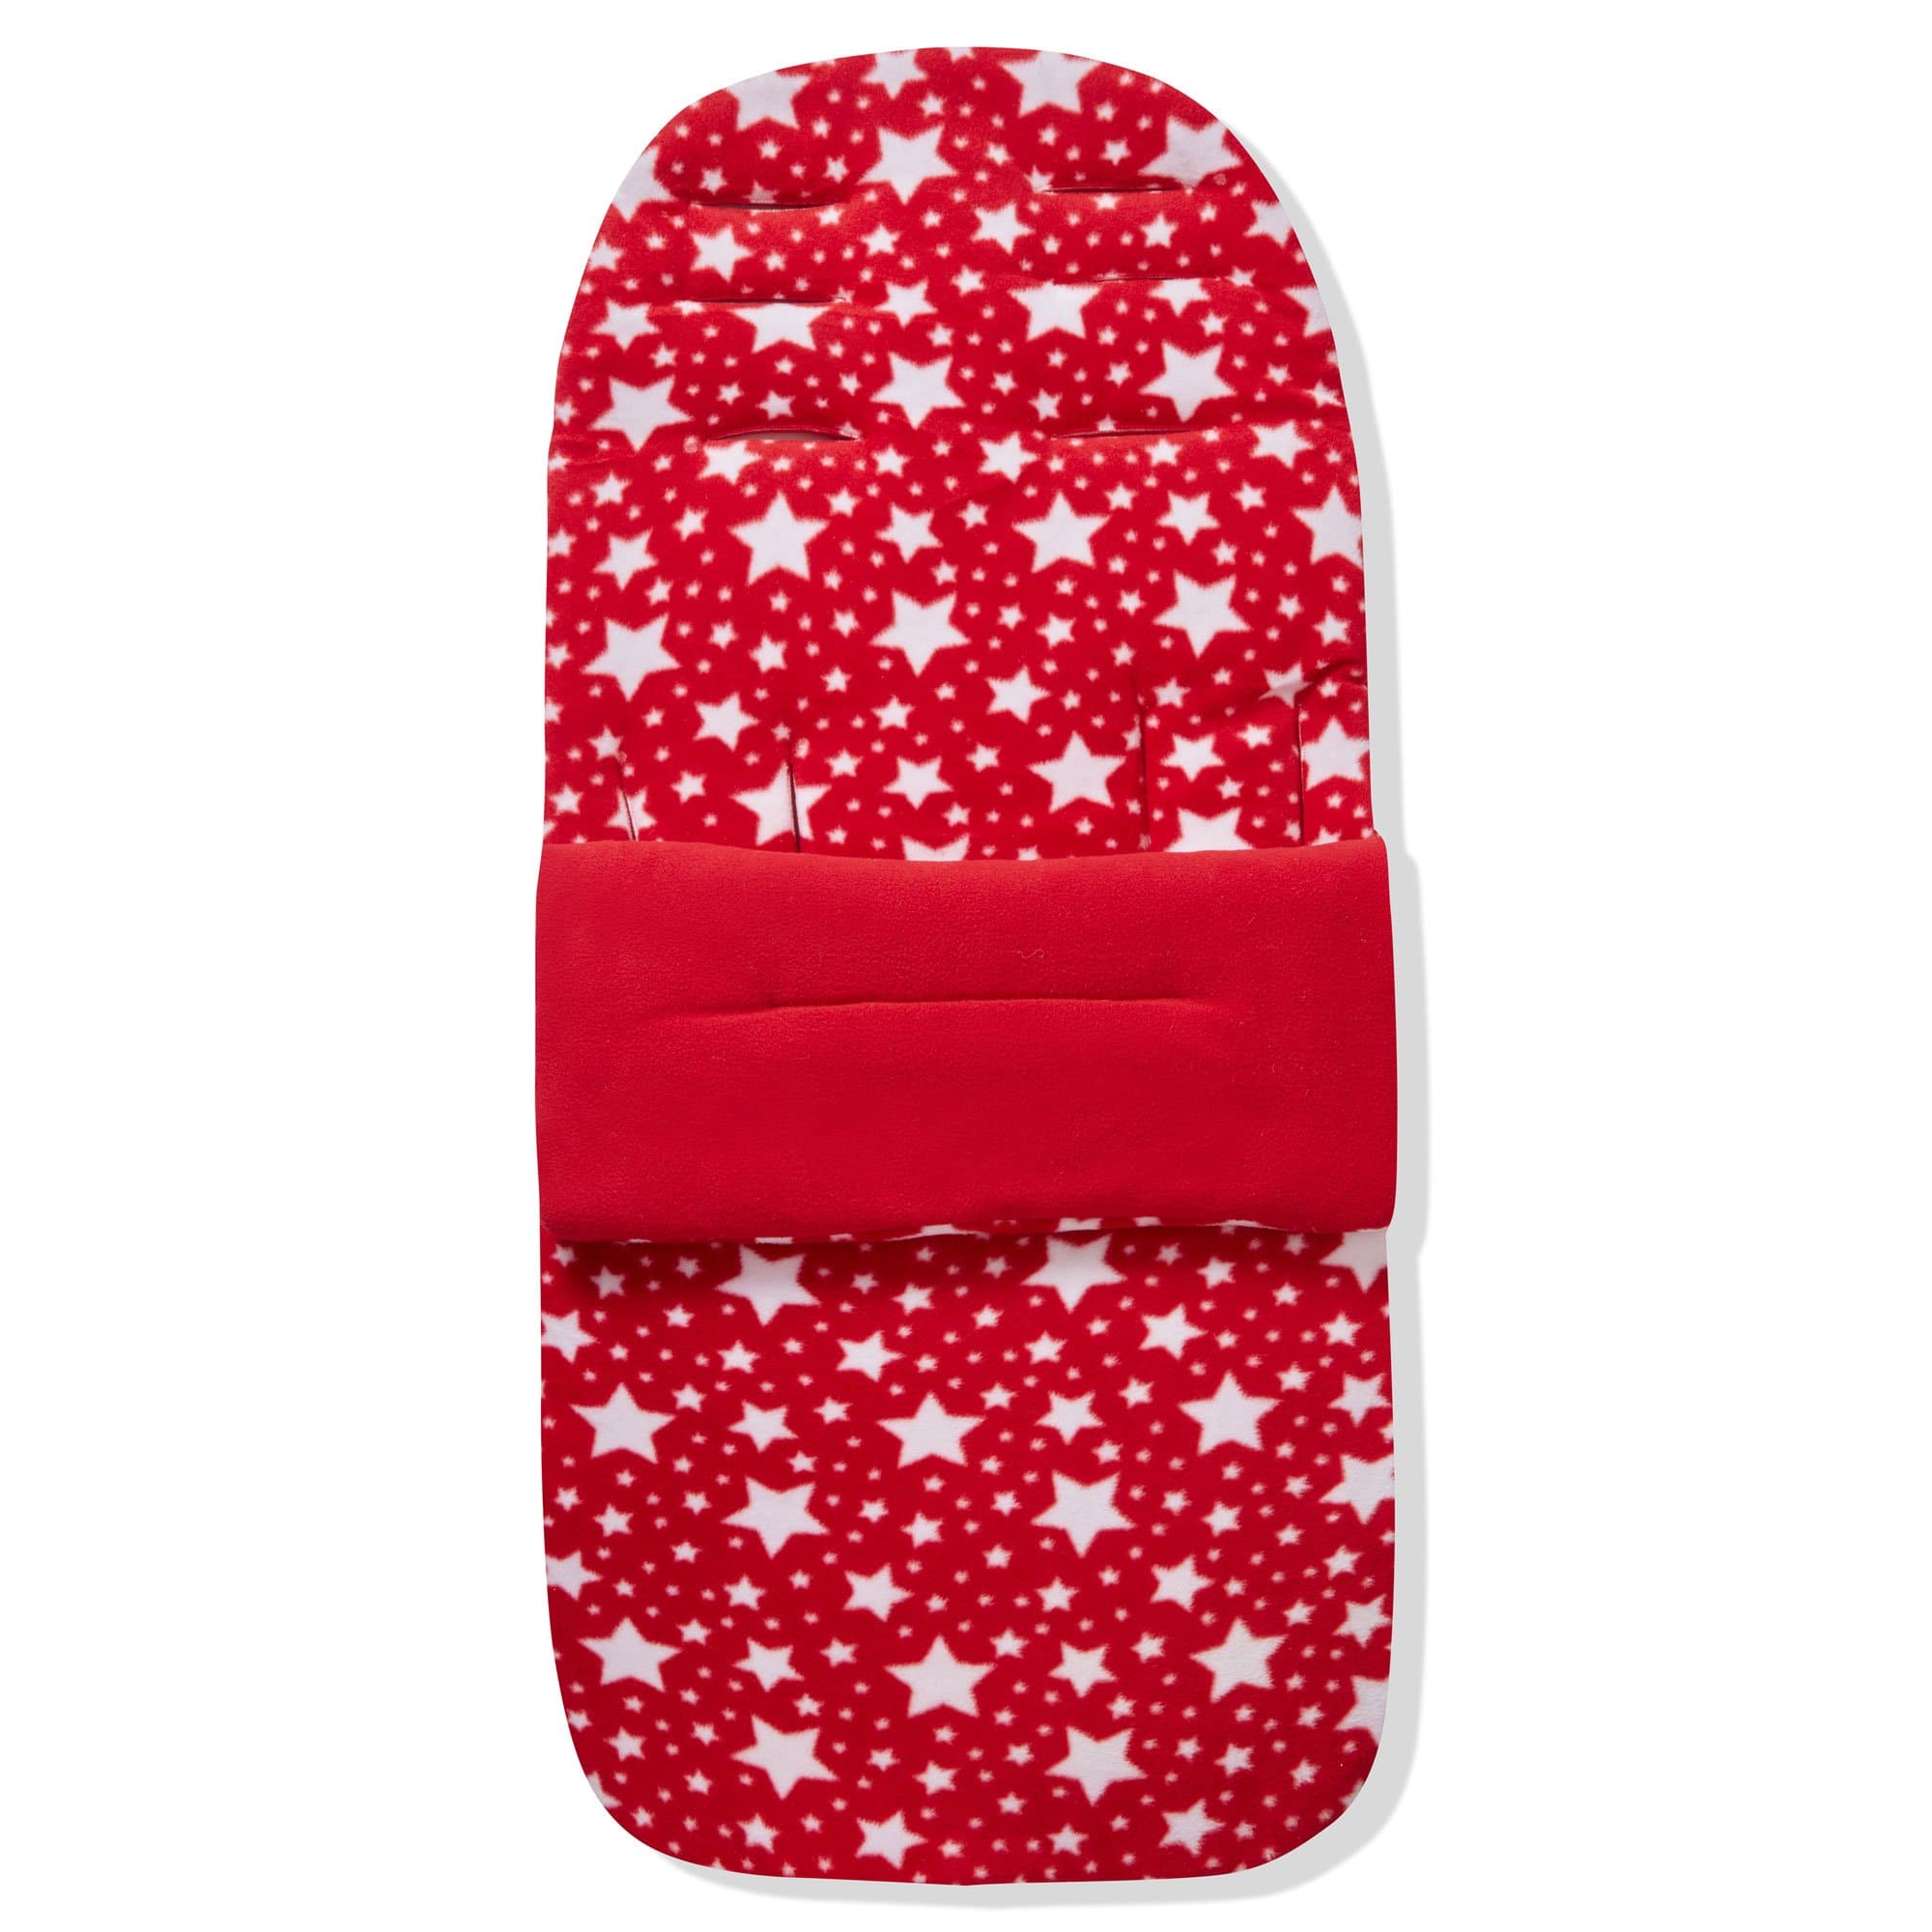 Fleece Footmuff / Cosy Toes Compatible With Bumbleride - Red Star / Fits All Models | For Your Little One